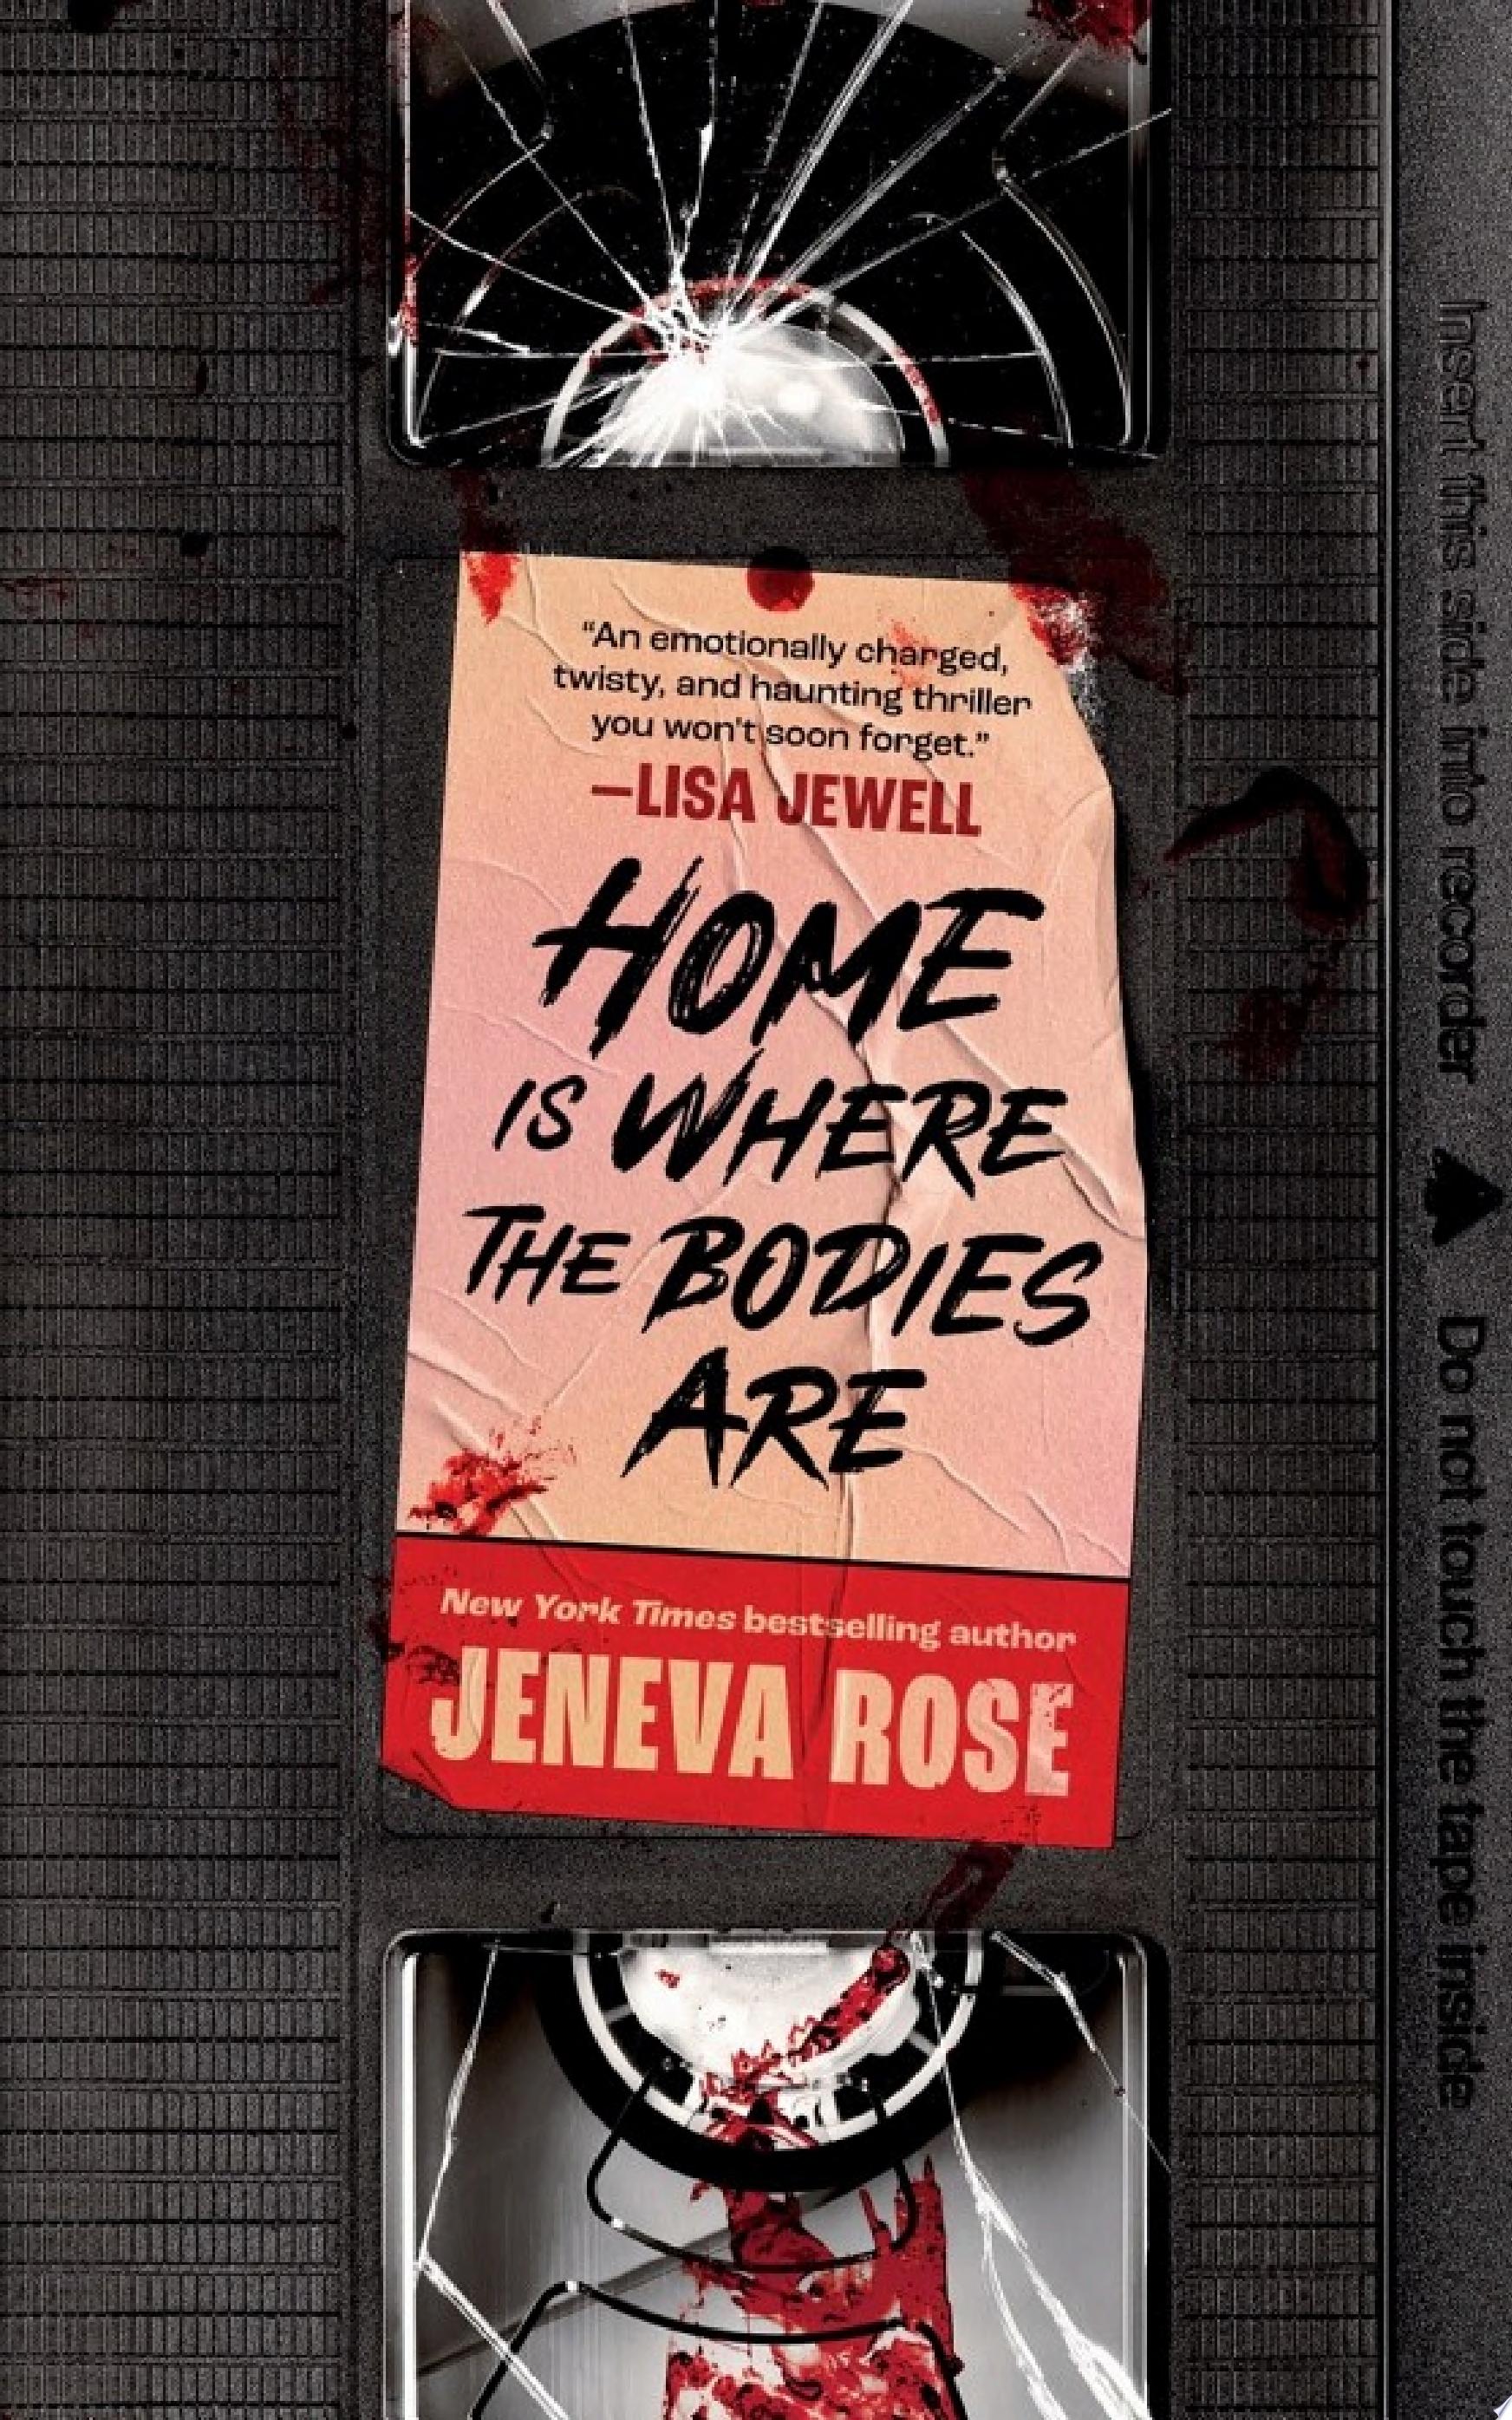 Image for "Home Is Where the Bodies Are"